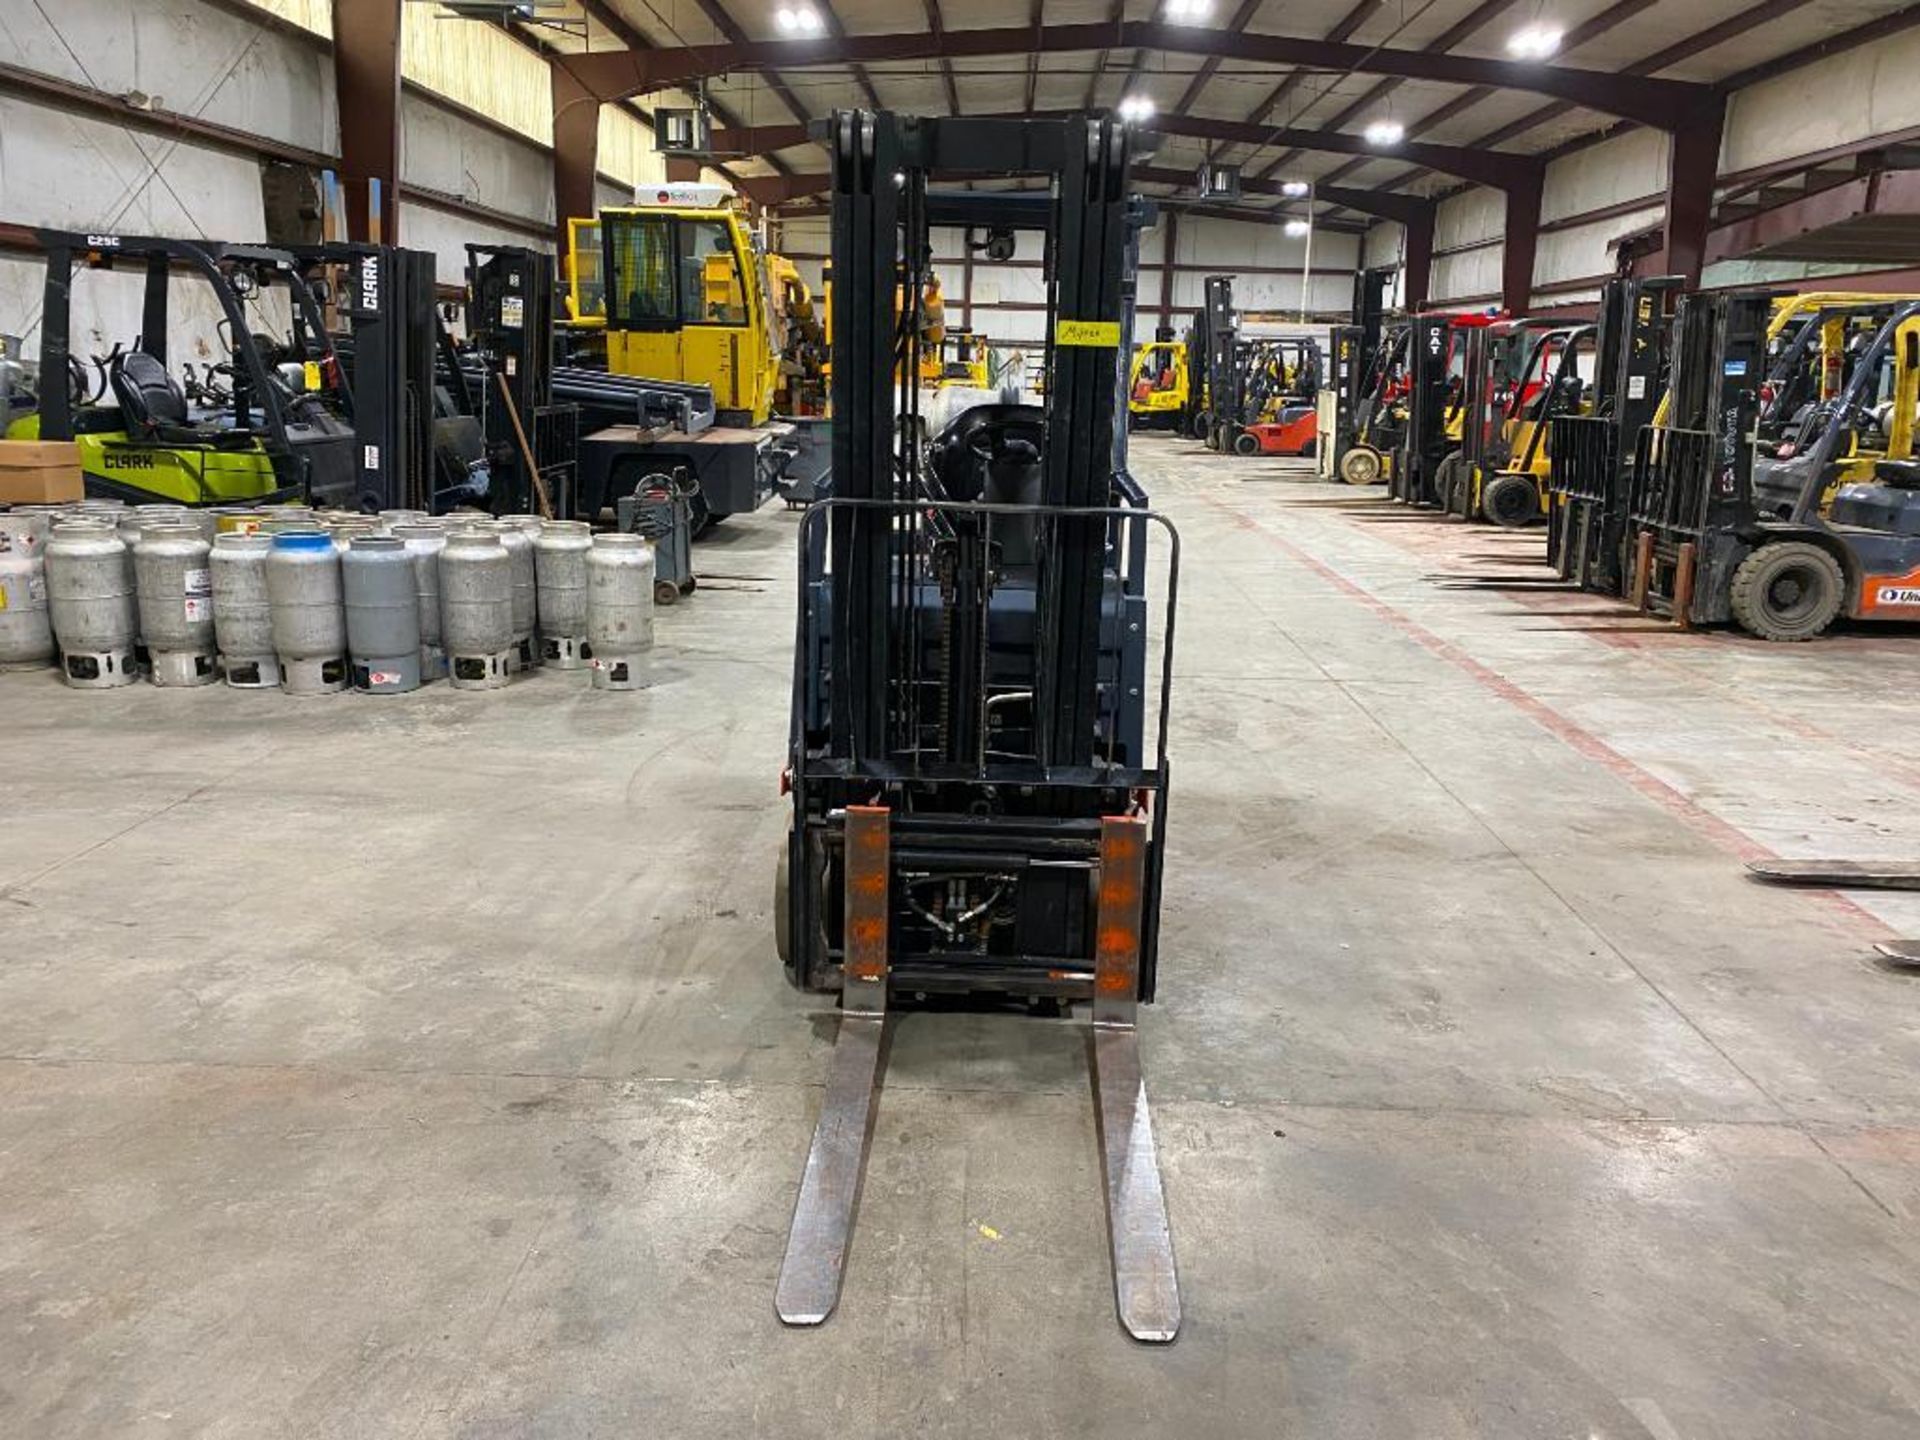 2018 Toyota 3,000-LB. Capacity Forklift, Model 8FGCU15, S/N 39697, LPG, Non-Marking Cushion Tires, 3 - Image 2 of 5